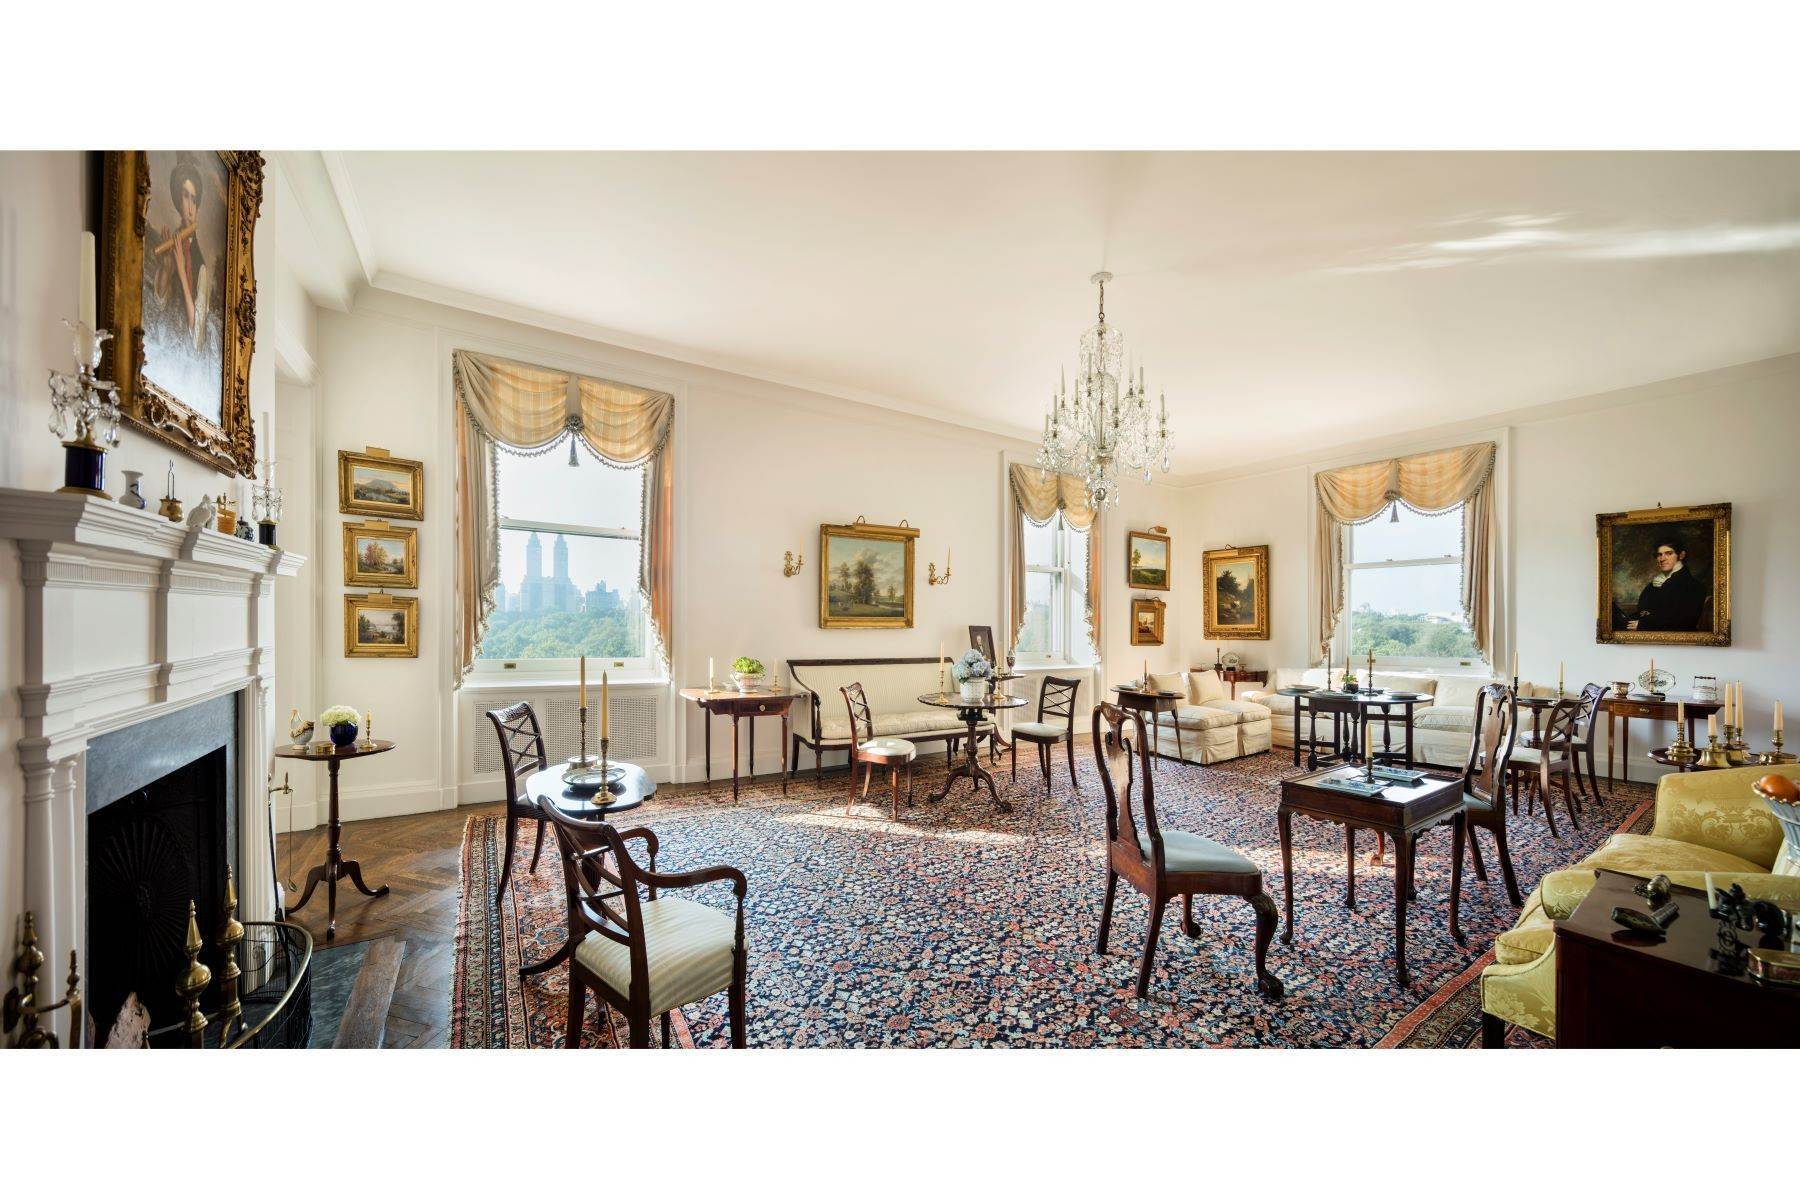 Co-op Properties for Sale at Dramatic Central Park Views 927 Fifth Avenue, 9th Floor, New York, New York 10021 United States